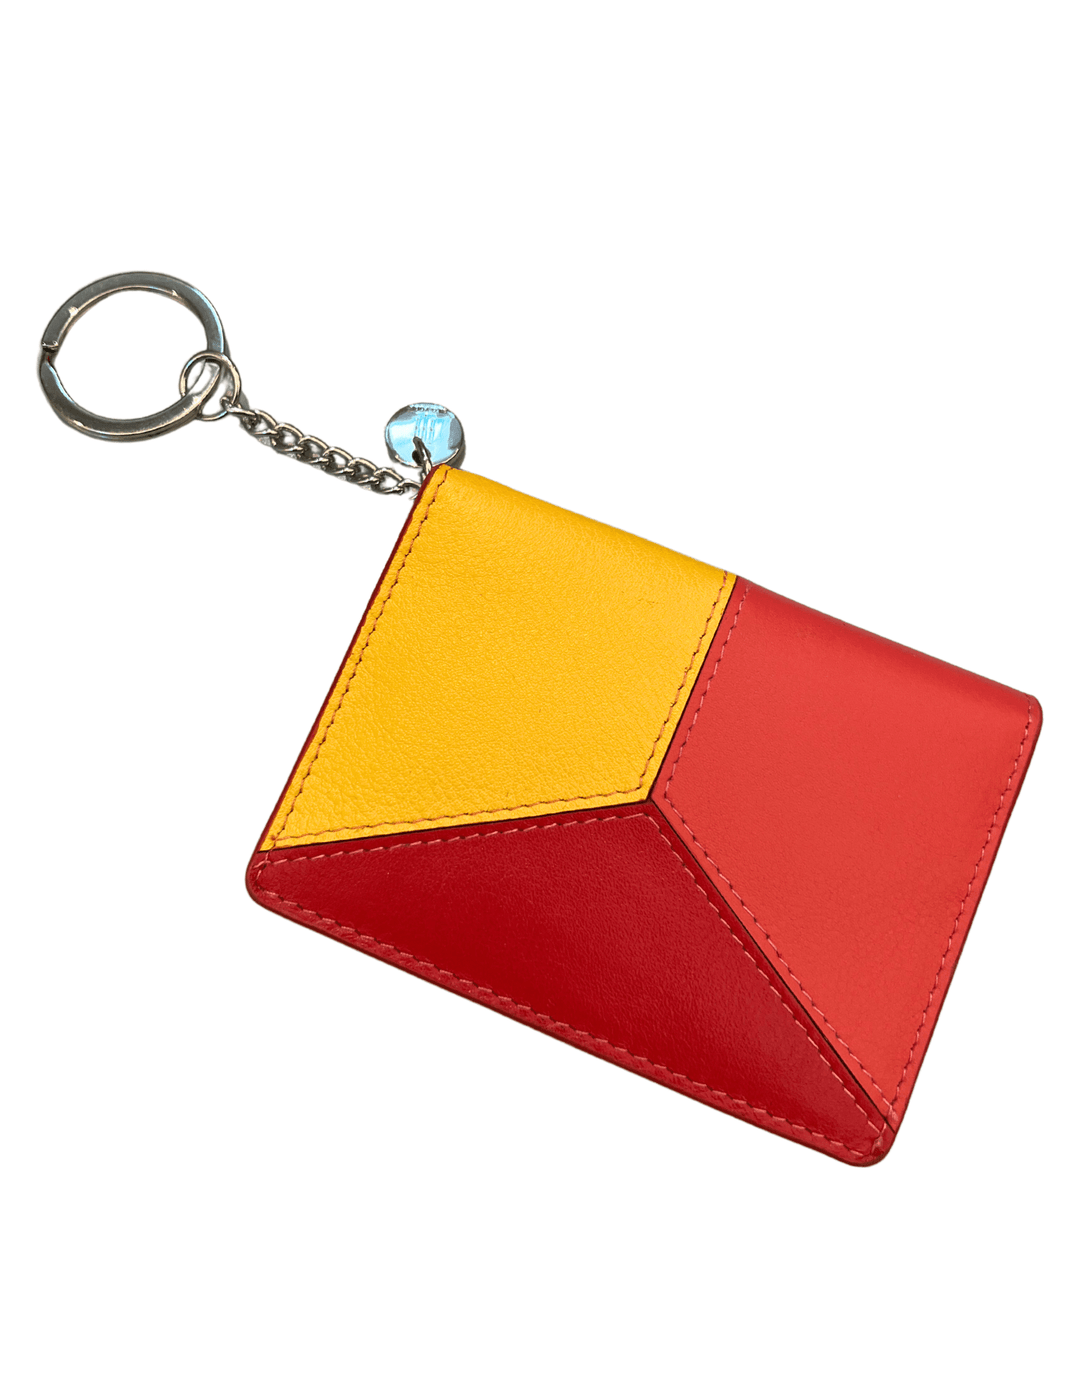 card holder with key ring leather goods gifts for women yellow red and coral